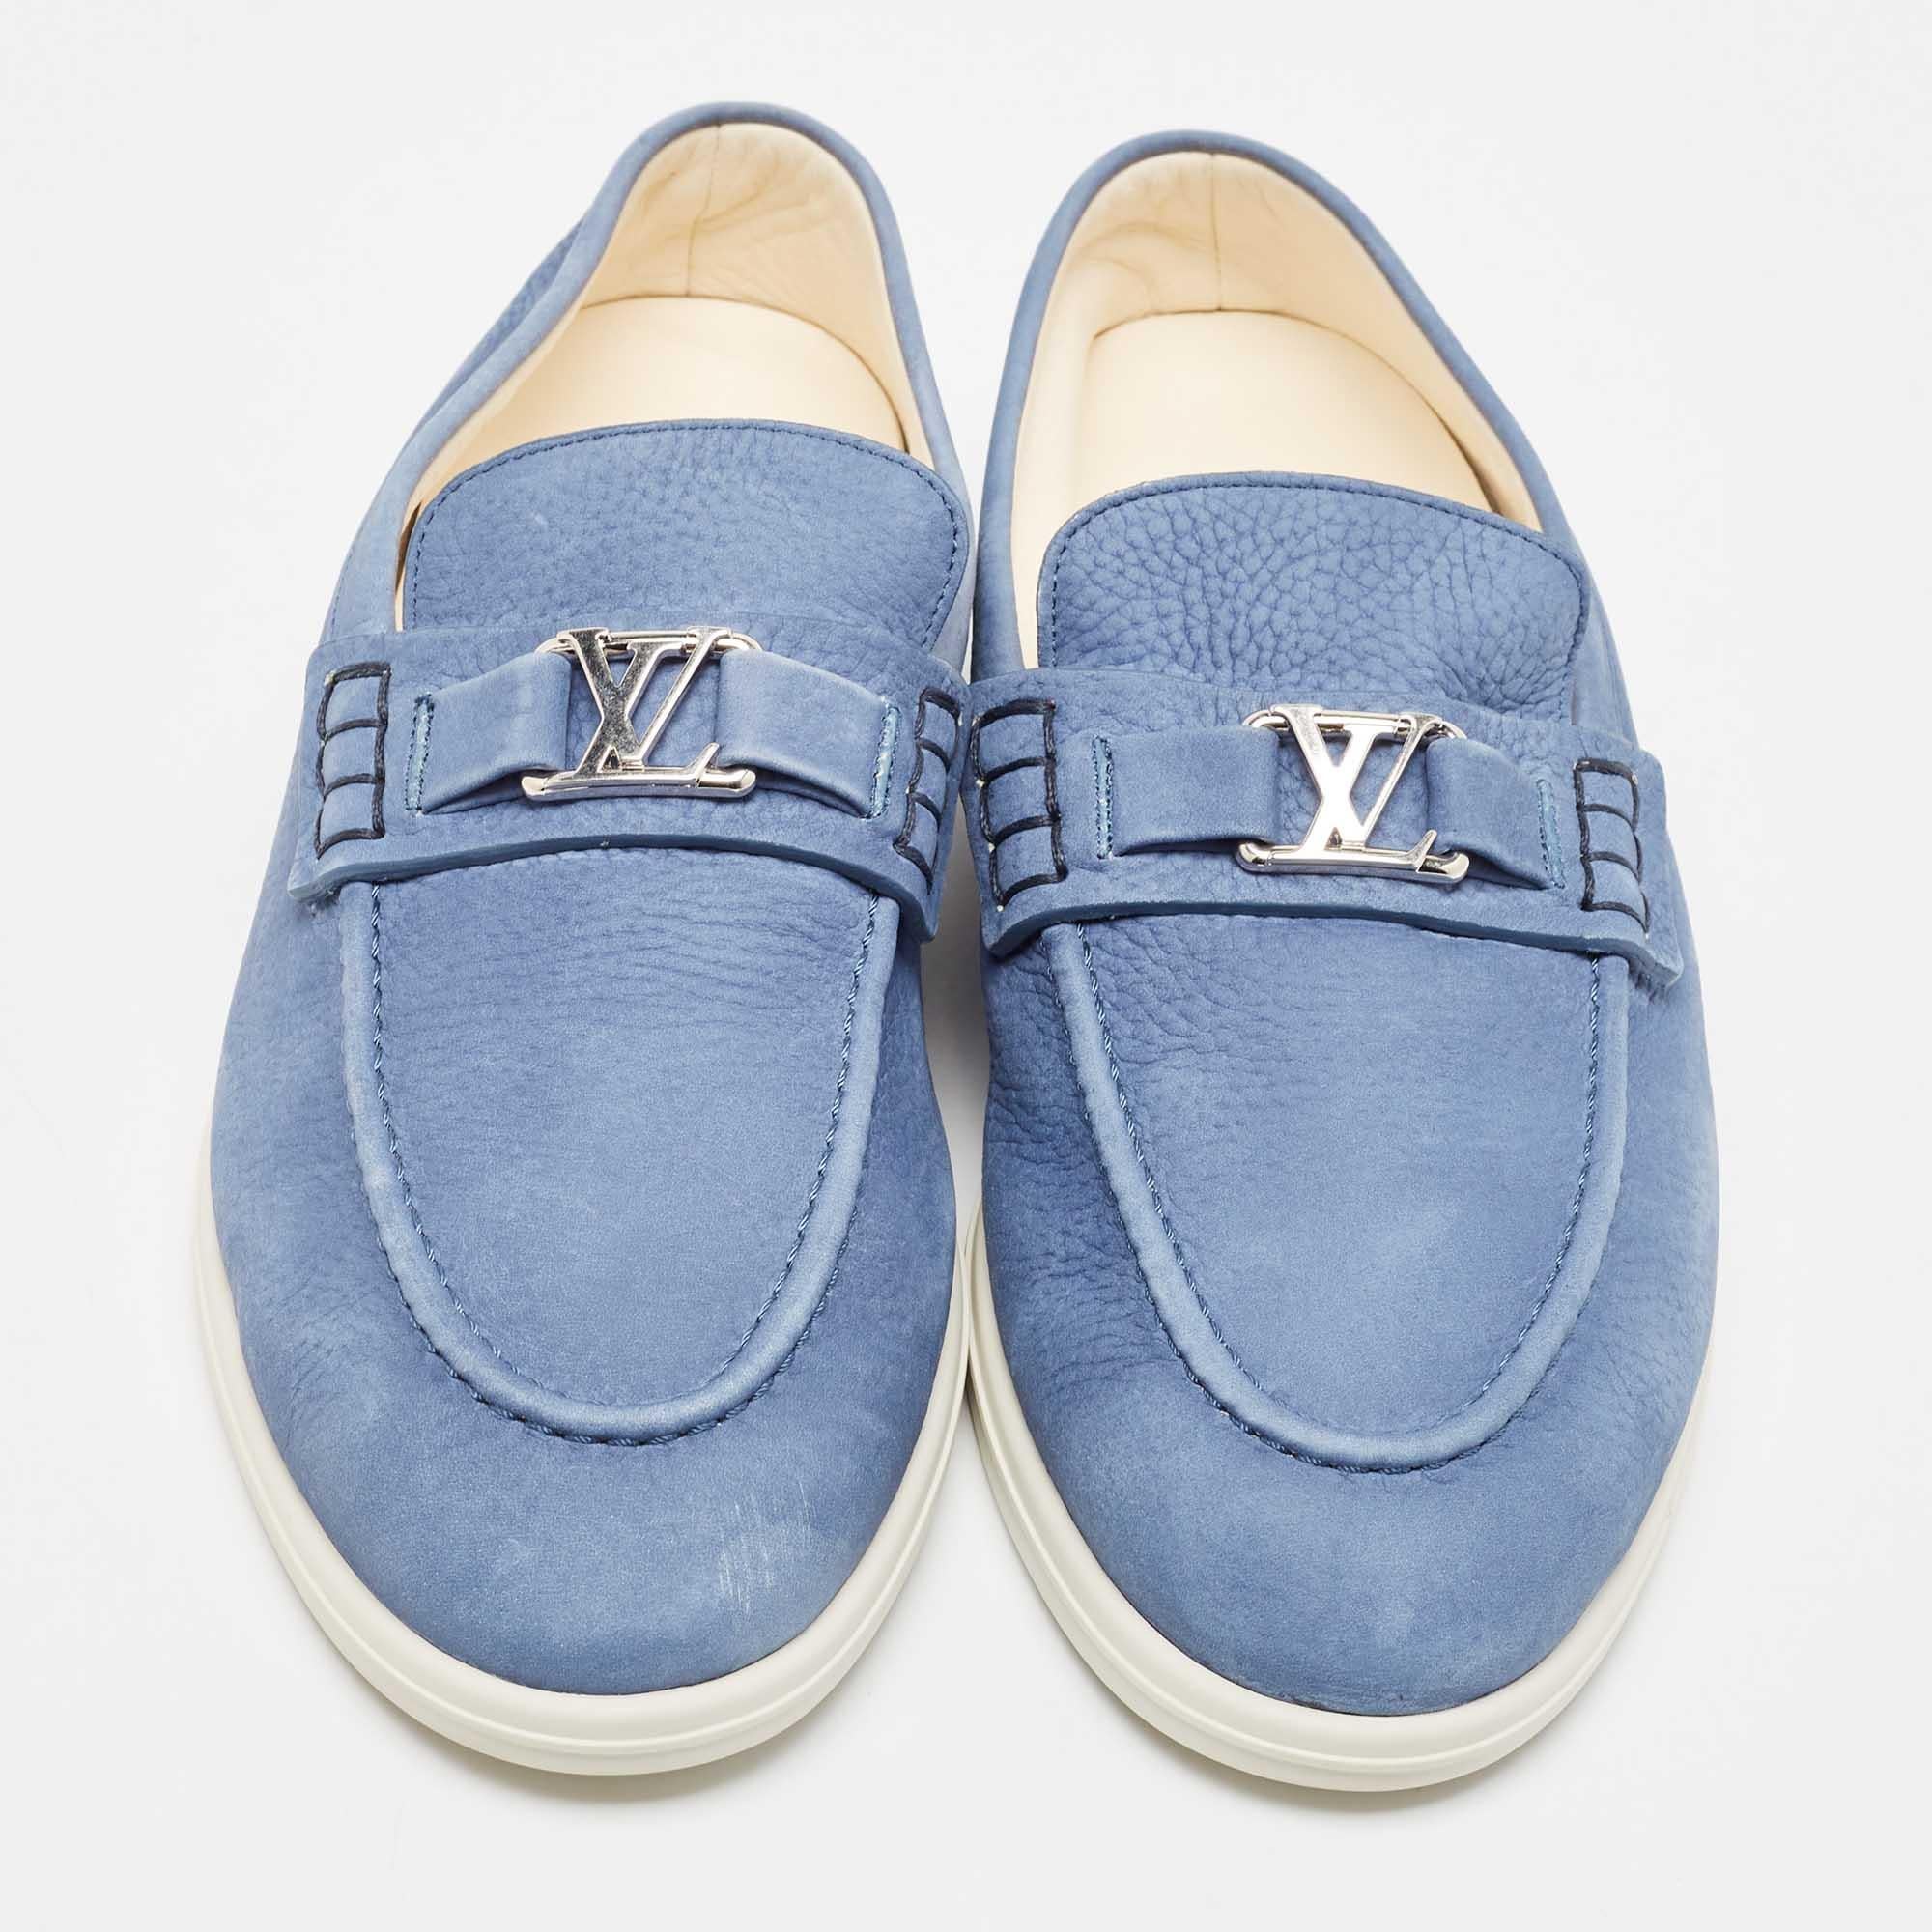 These timeless LV shoes are meant to last you season after season. They have a comfortable fit and high-quality finish.

Includes
Original Dustbag